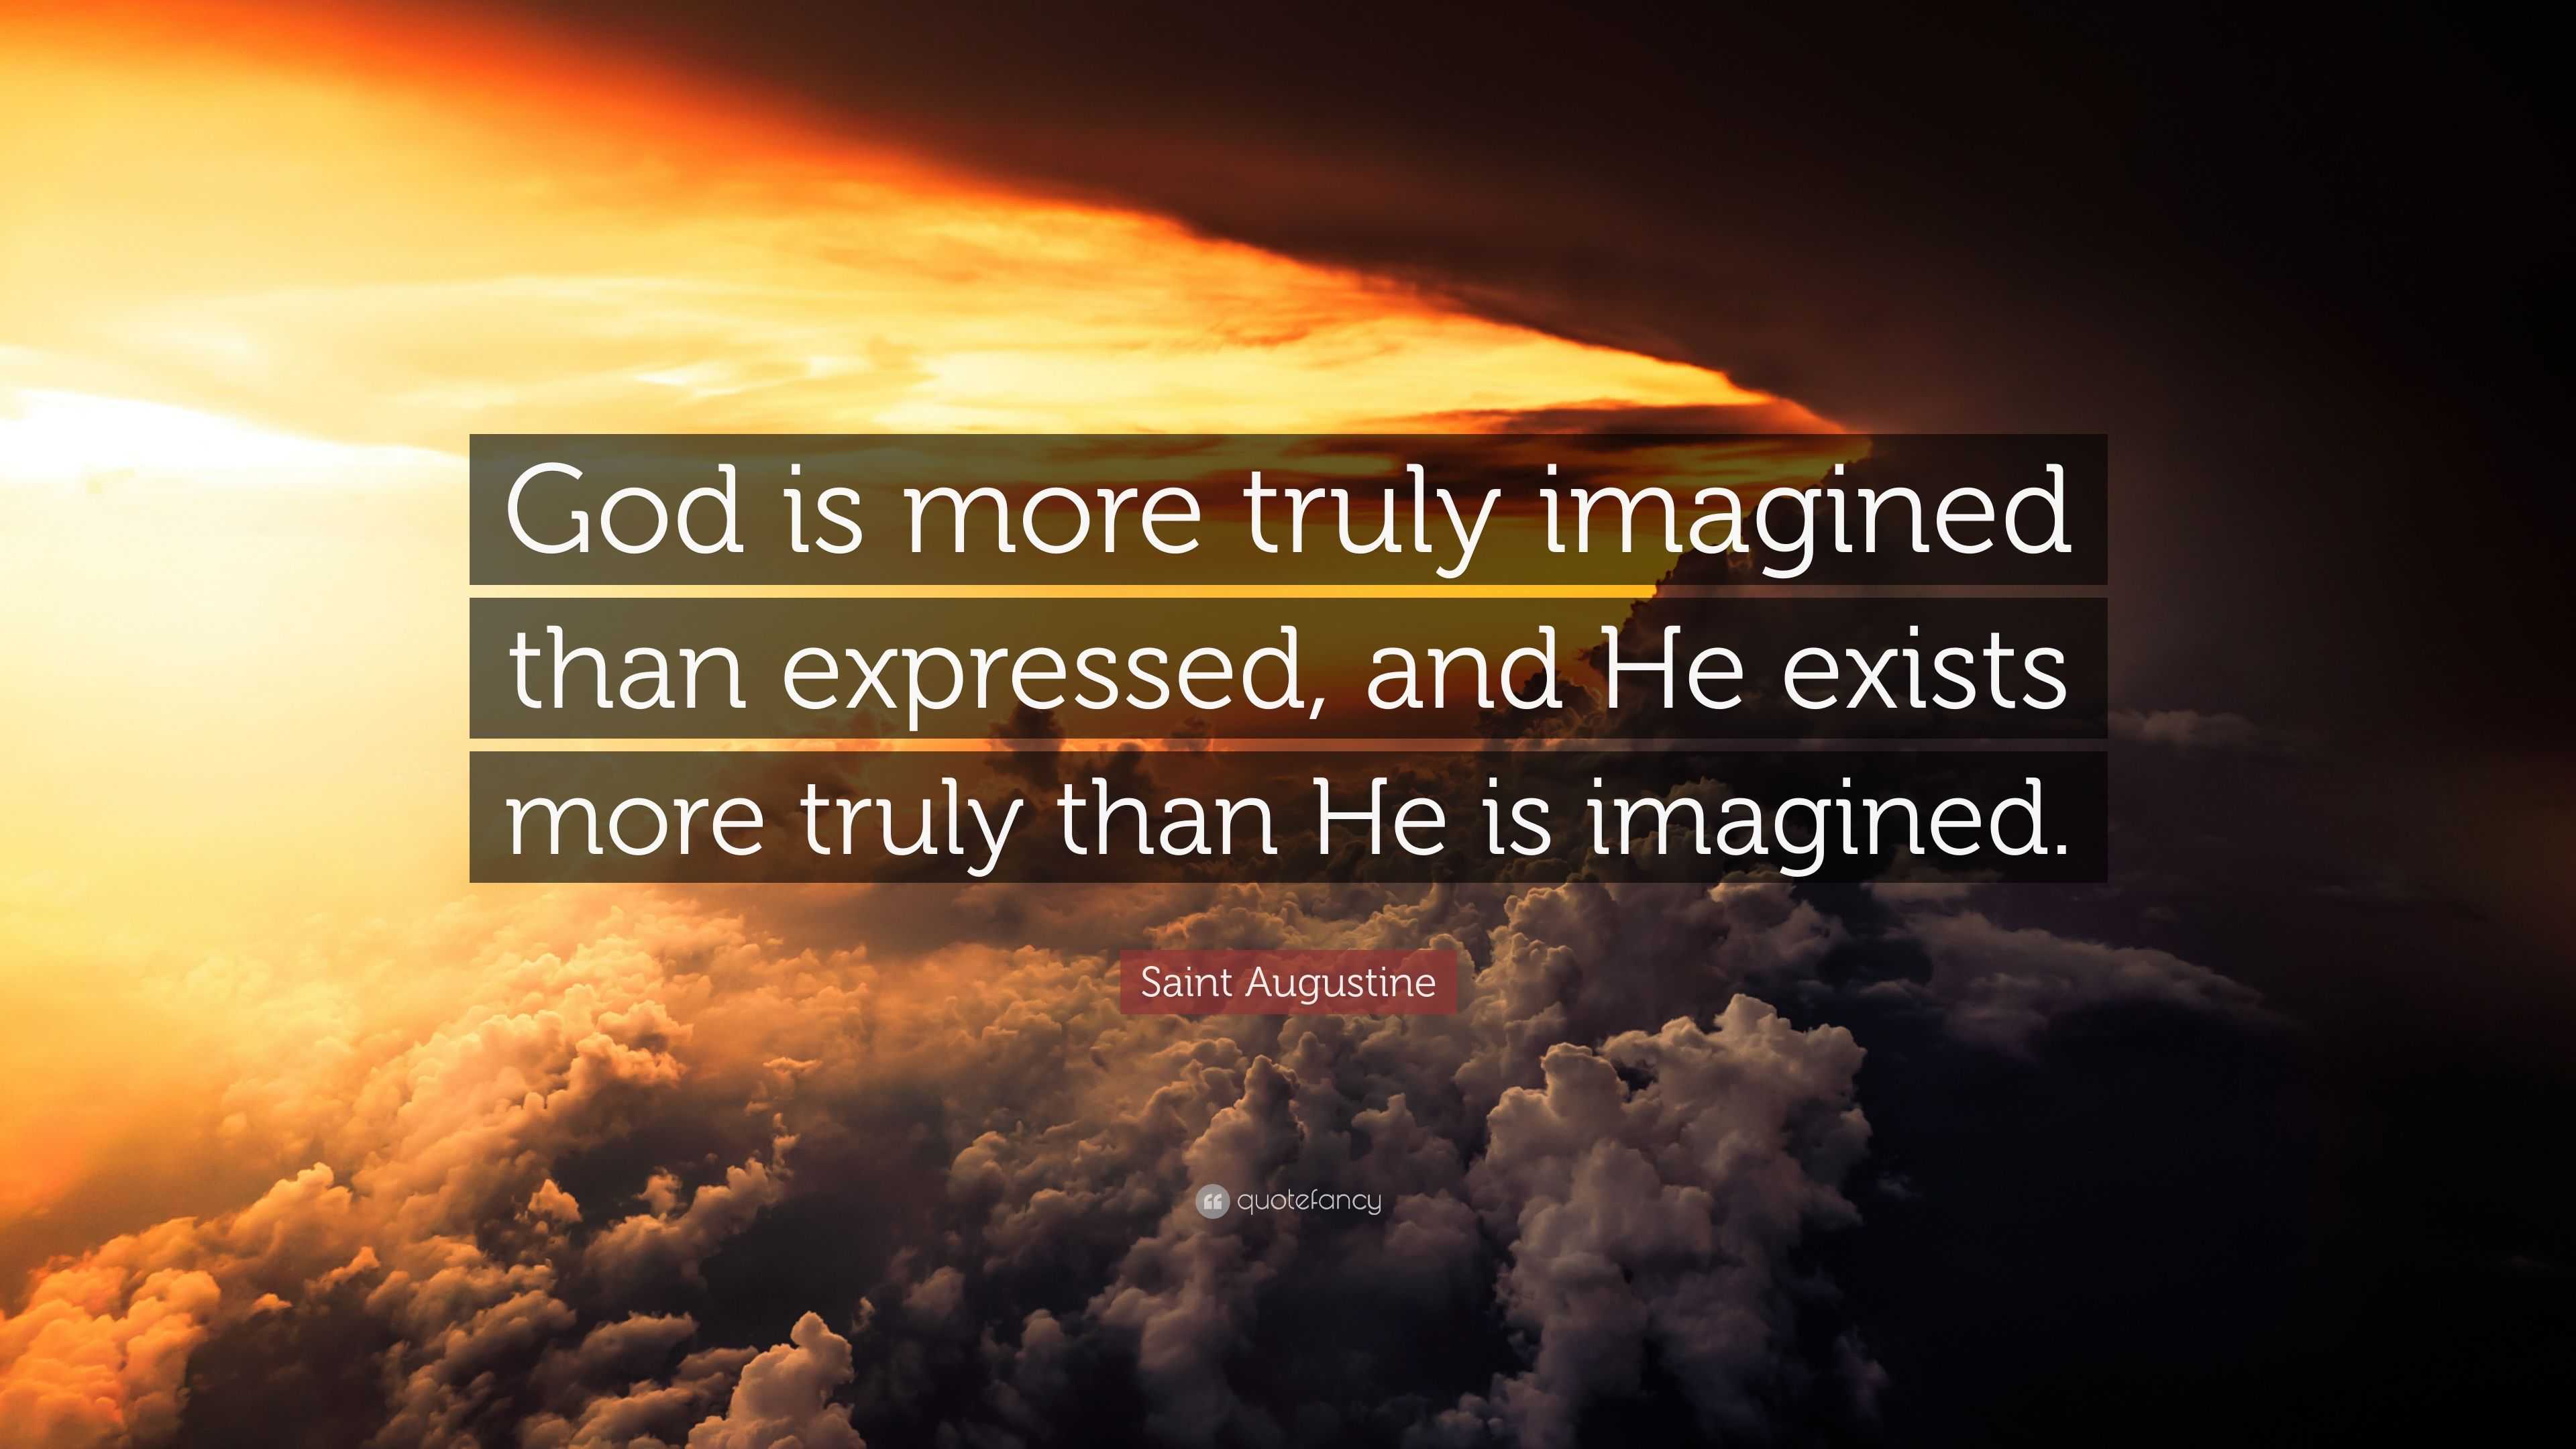 Saint Augustine Quote: “God is more truly imagined than expressed, and